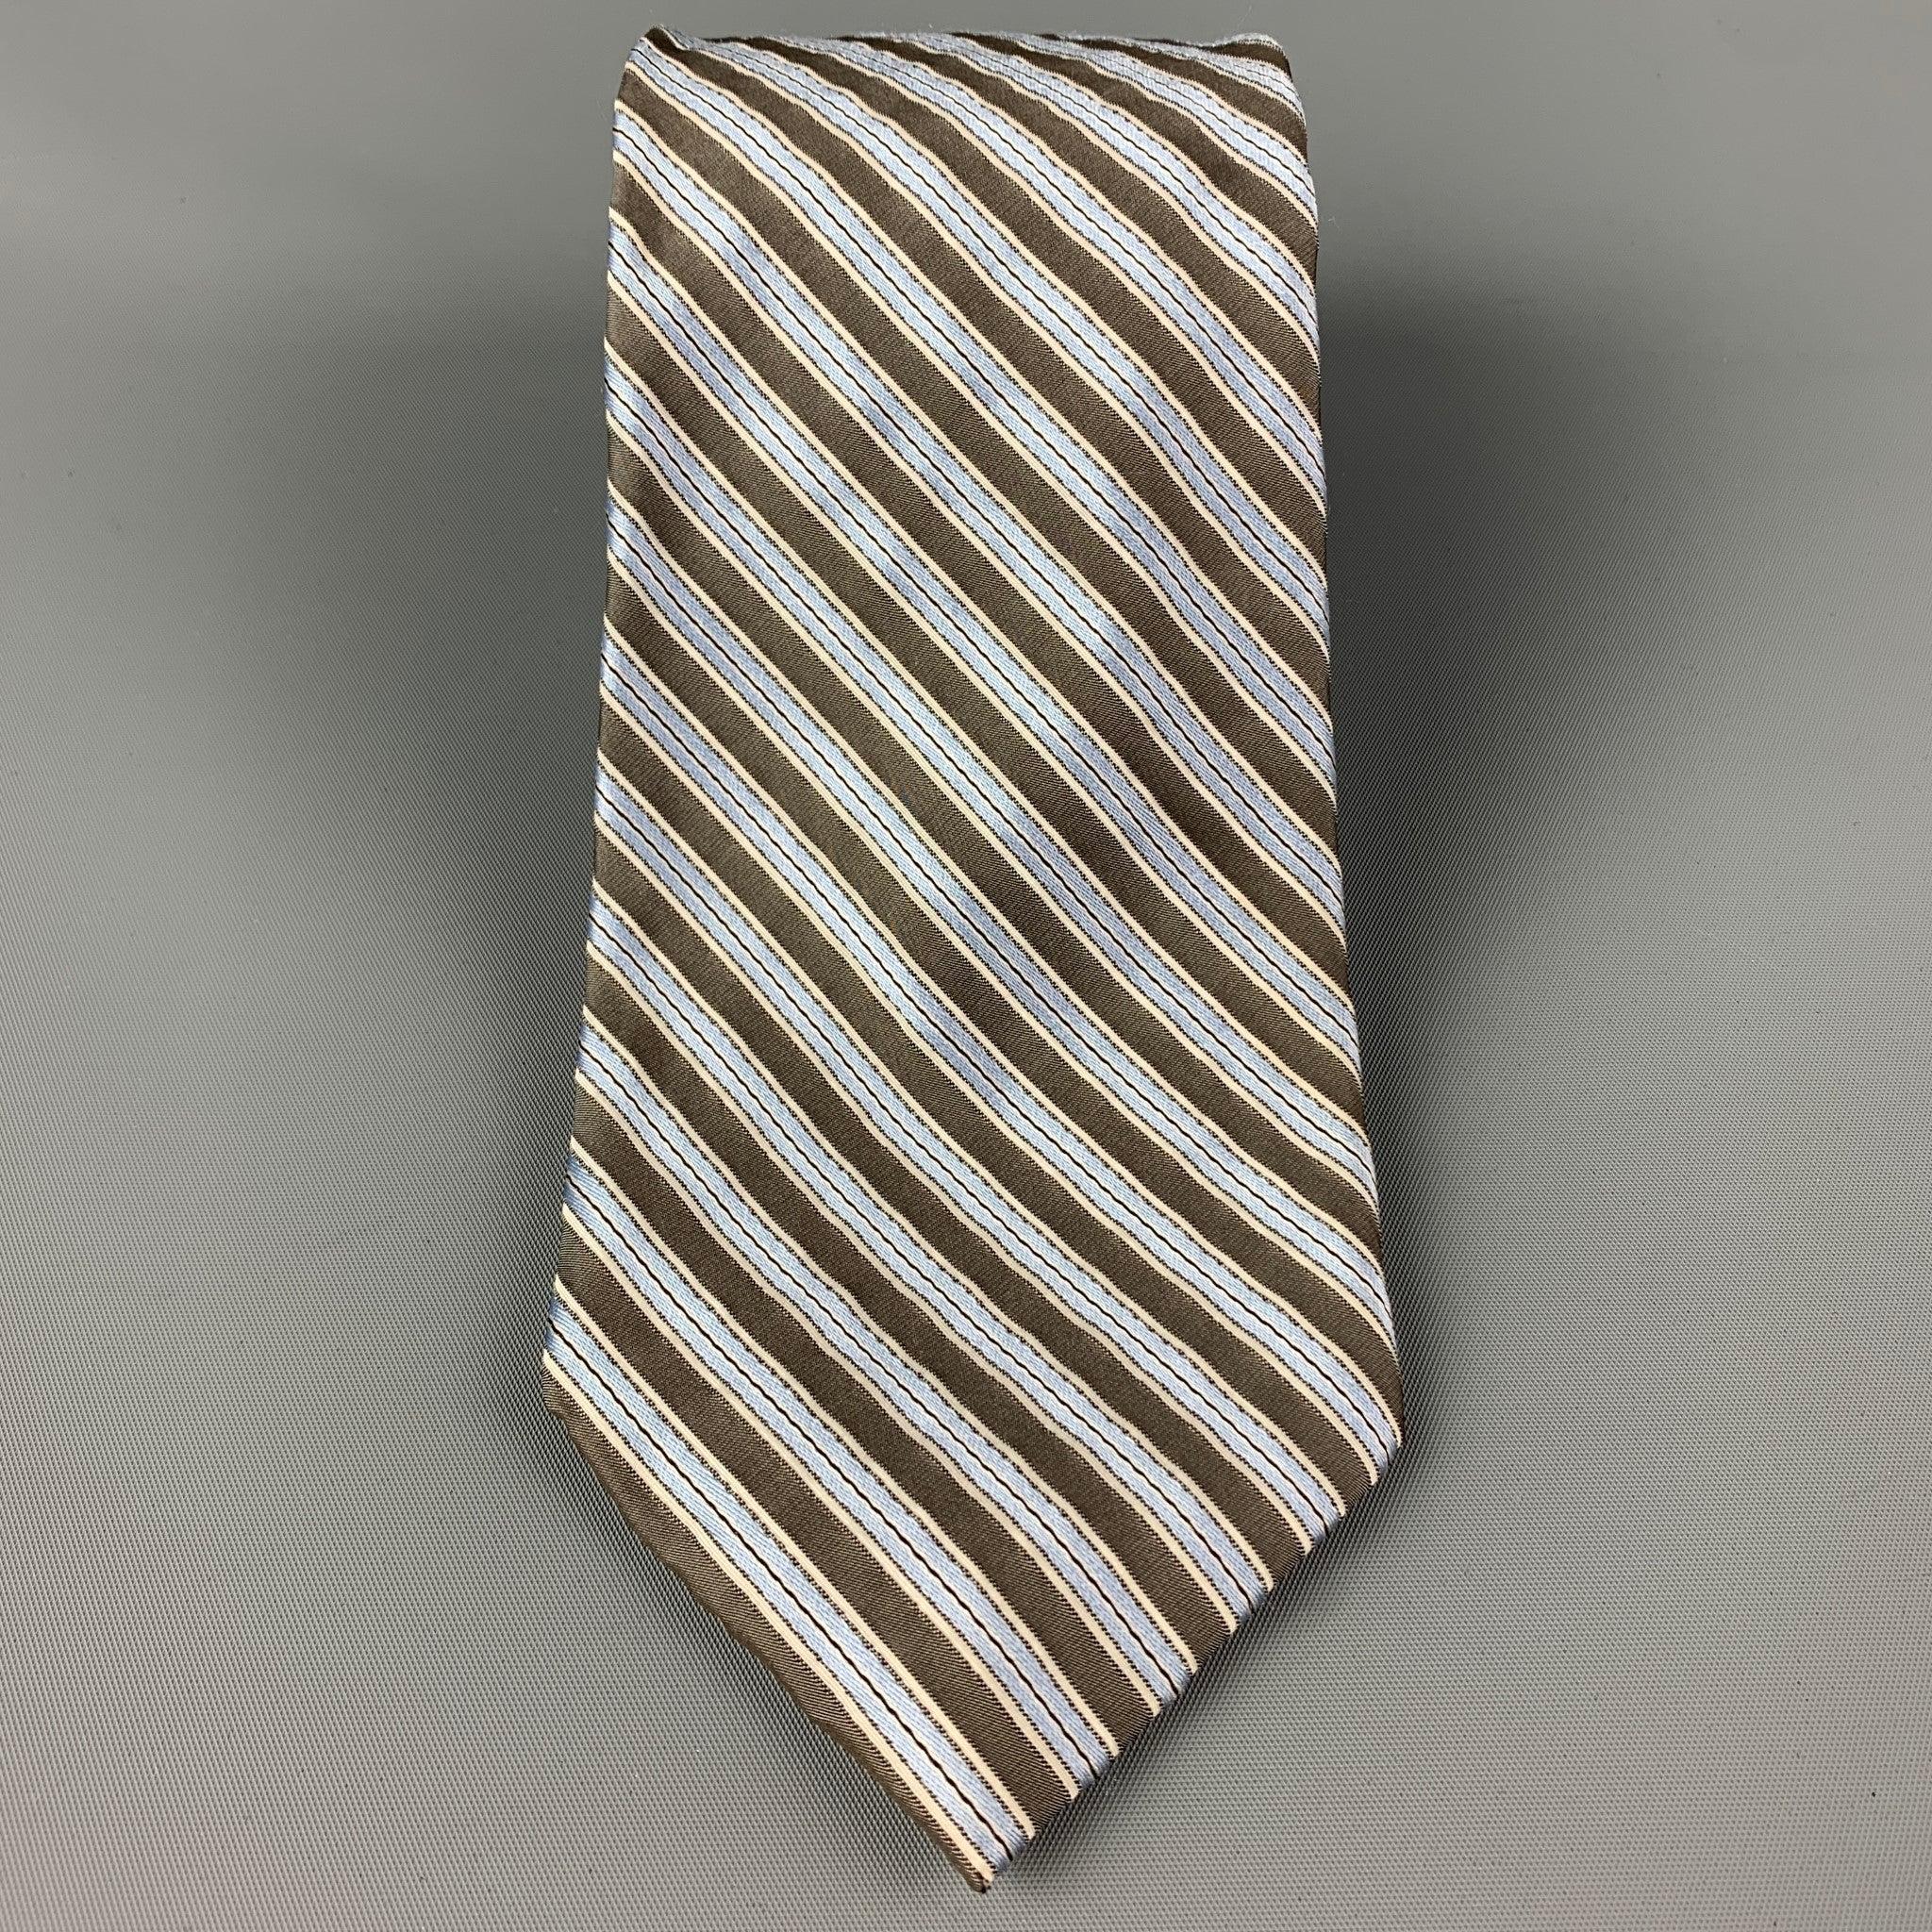 WILKES BASHFORD
necktie comes in a green & blue silk with a all over stripe print. Made in Italy. Very Good Pre-Owned Condition. 

Measurements: 
  Width: 3.5 inches  Length: 30 inches 
  
  
 
Reference: 120670
Category: Tie
More Details
   